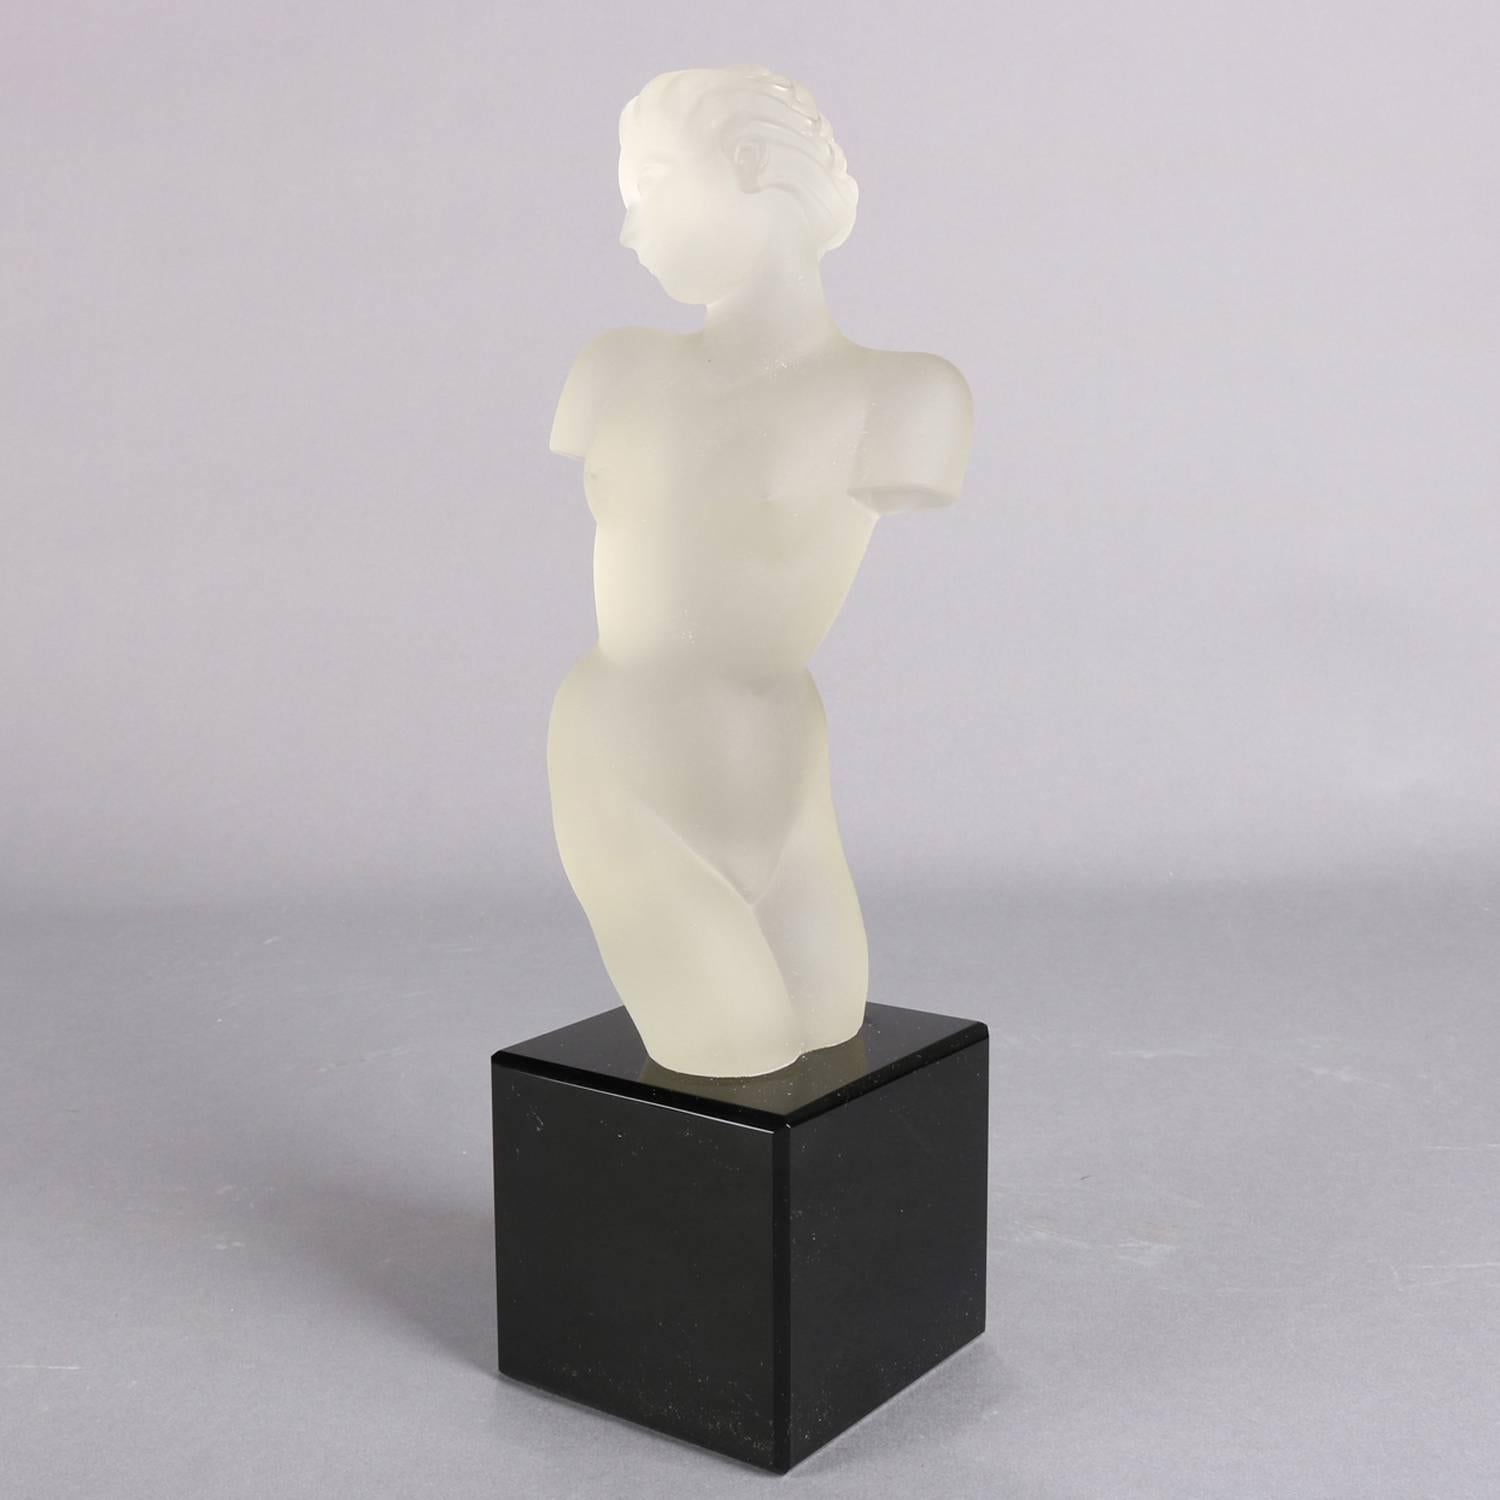 French Classical frosted crystal sculpture attributed to Rene Lalique depicts 3/4 torso portrait of nude woman and mounted on ebony base, 20th century

Measures: 11